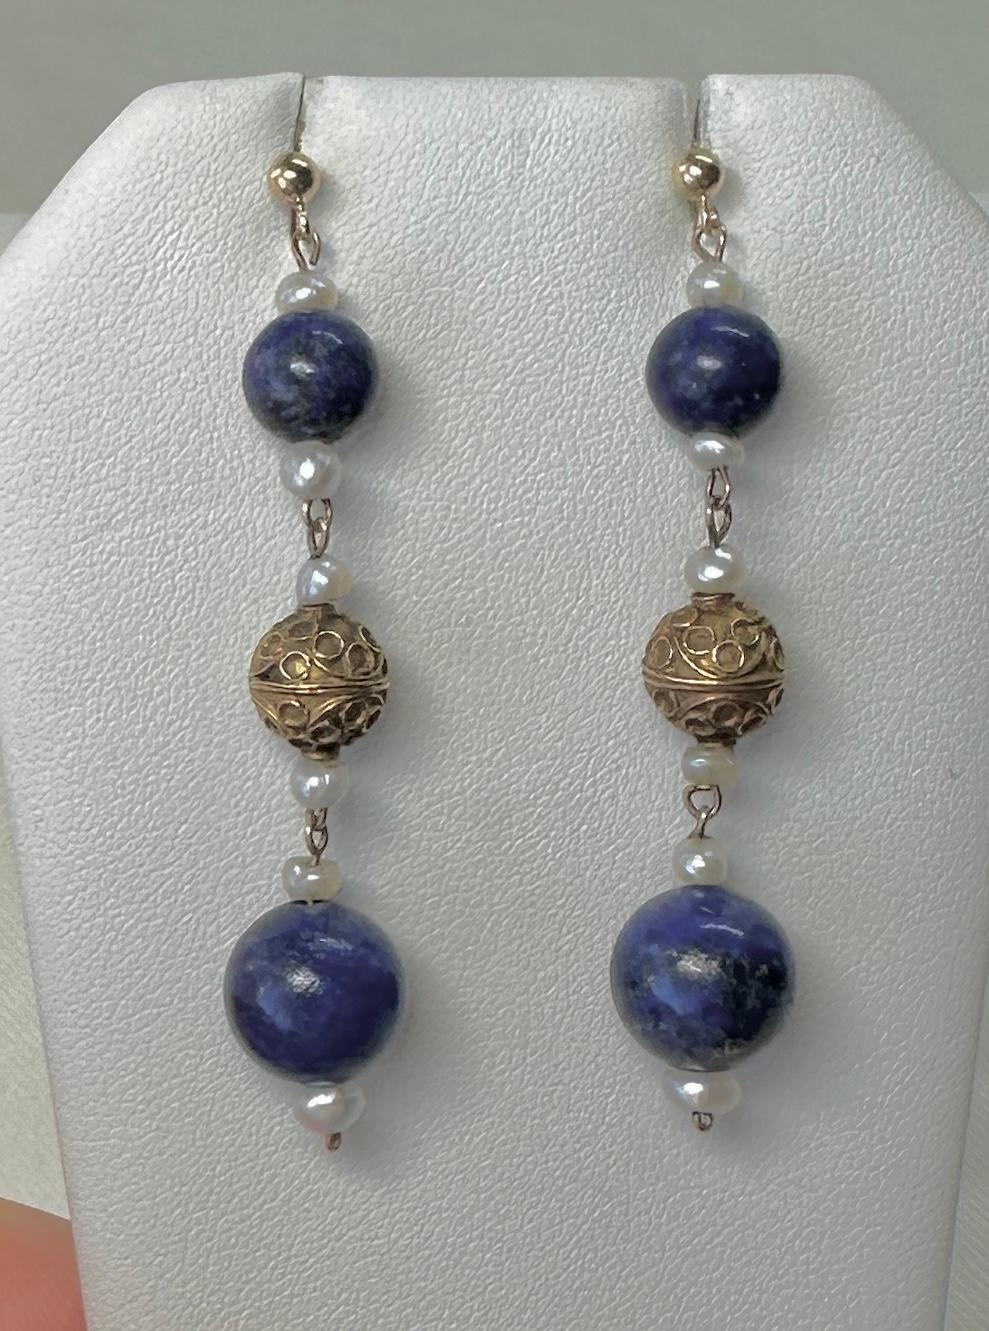 Victorian Etruscan Lapis Lazuli Pendant Dangle Drop Earrings 14 -18 Karat Gold In Excellent Condition For Sale In New York, NY